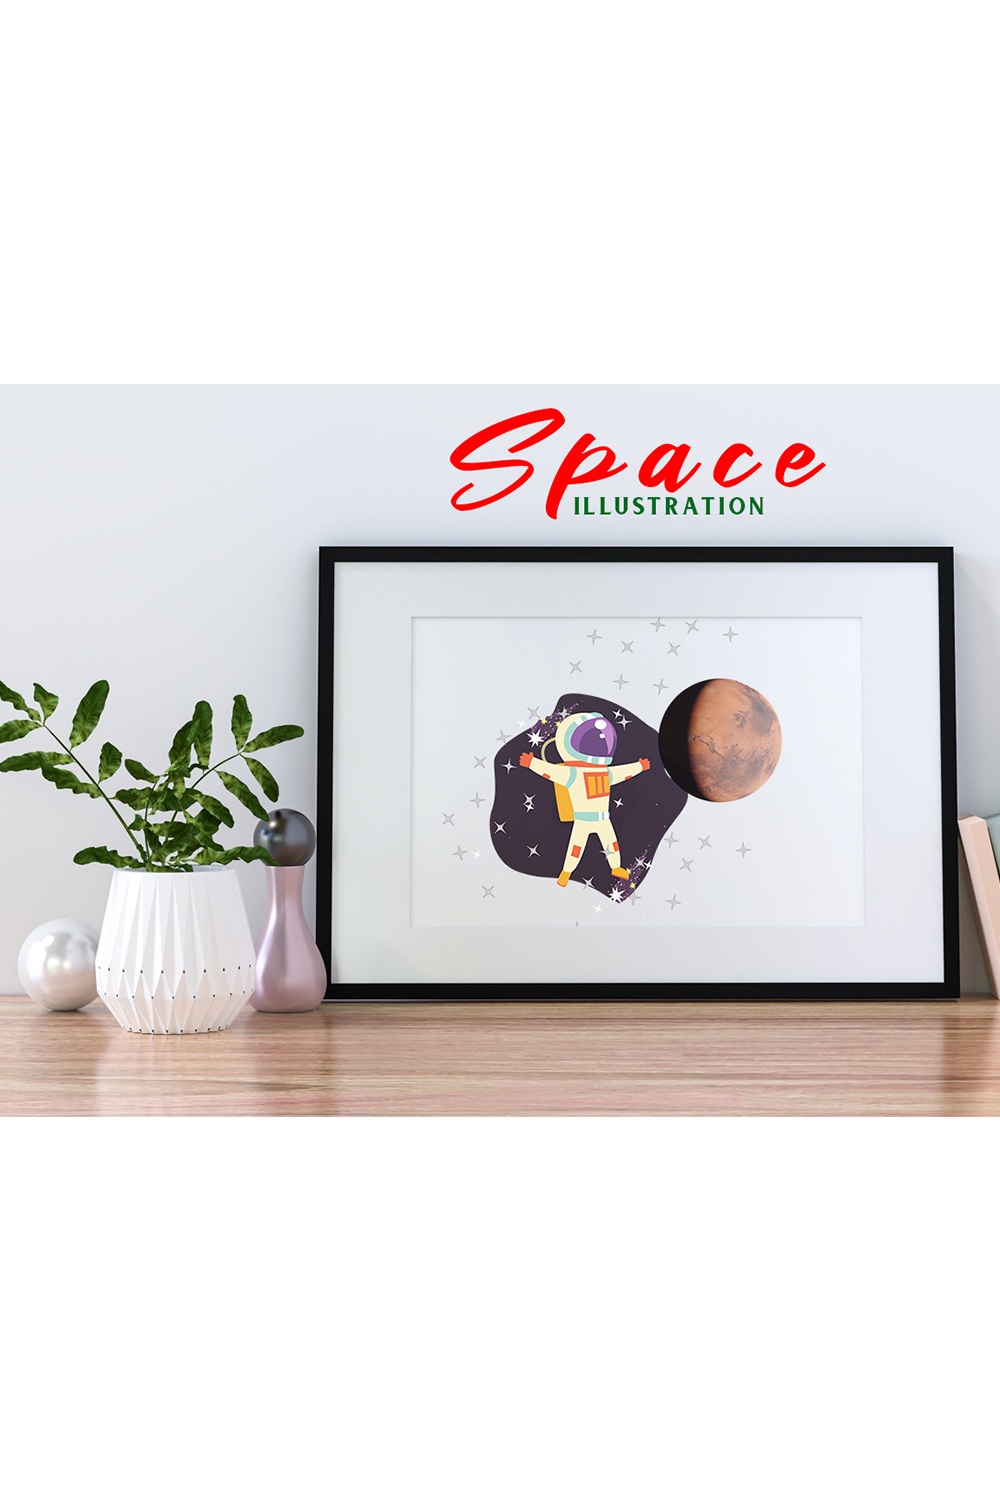 Unique image on the theme of space in a frame